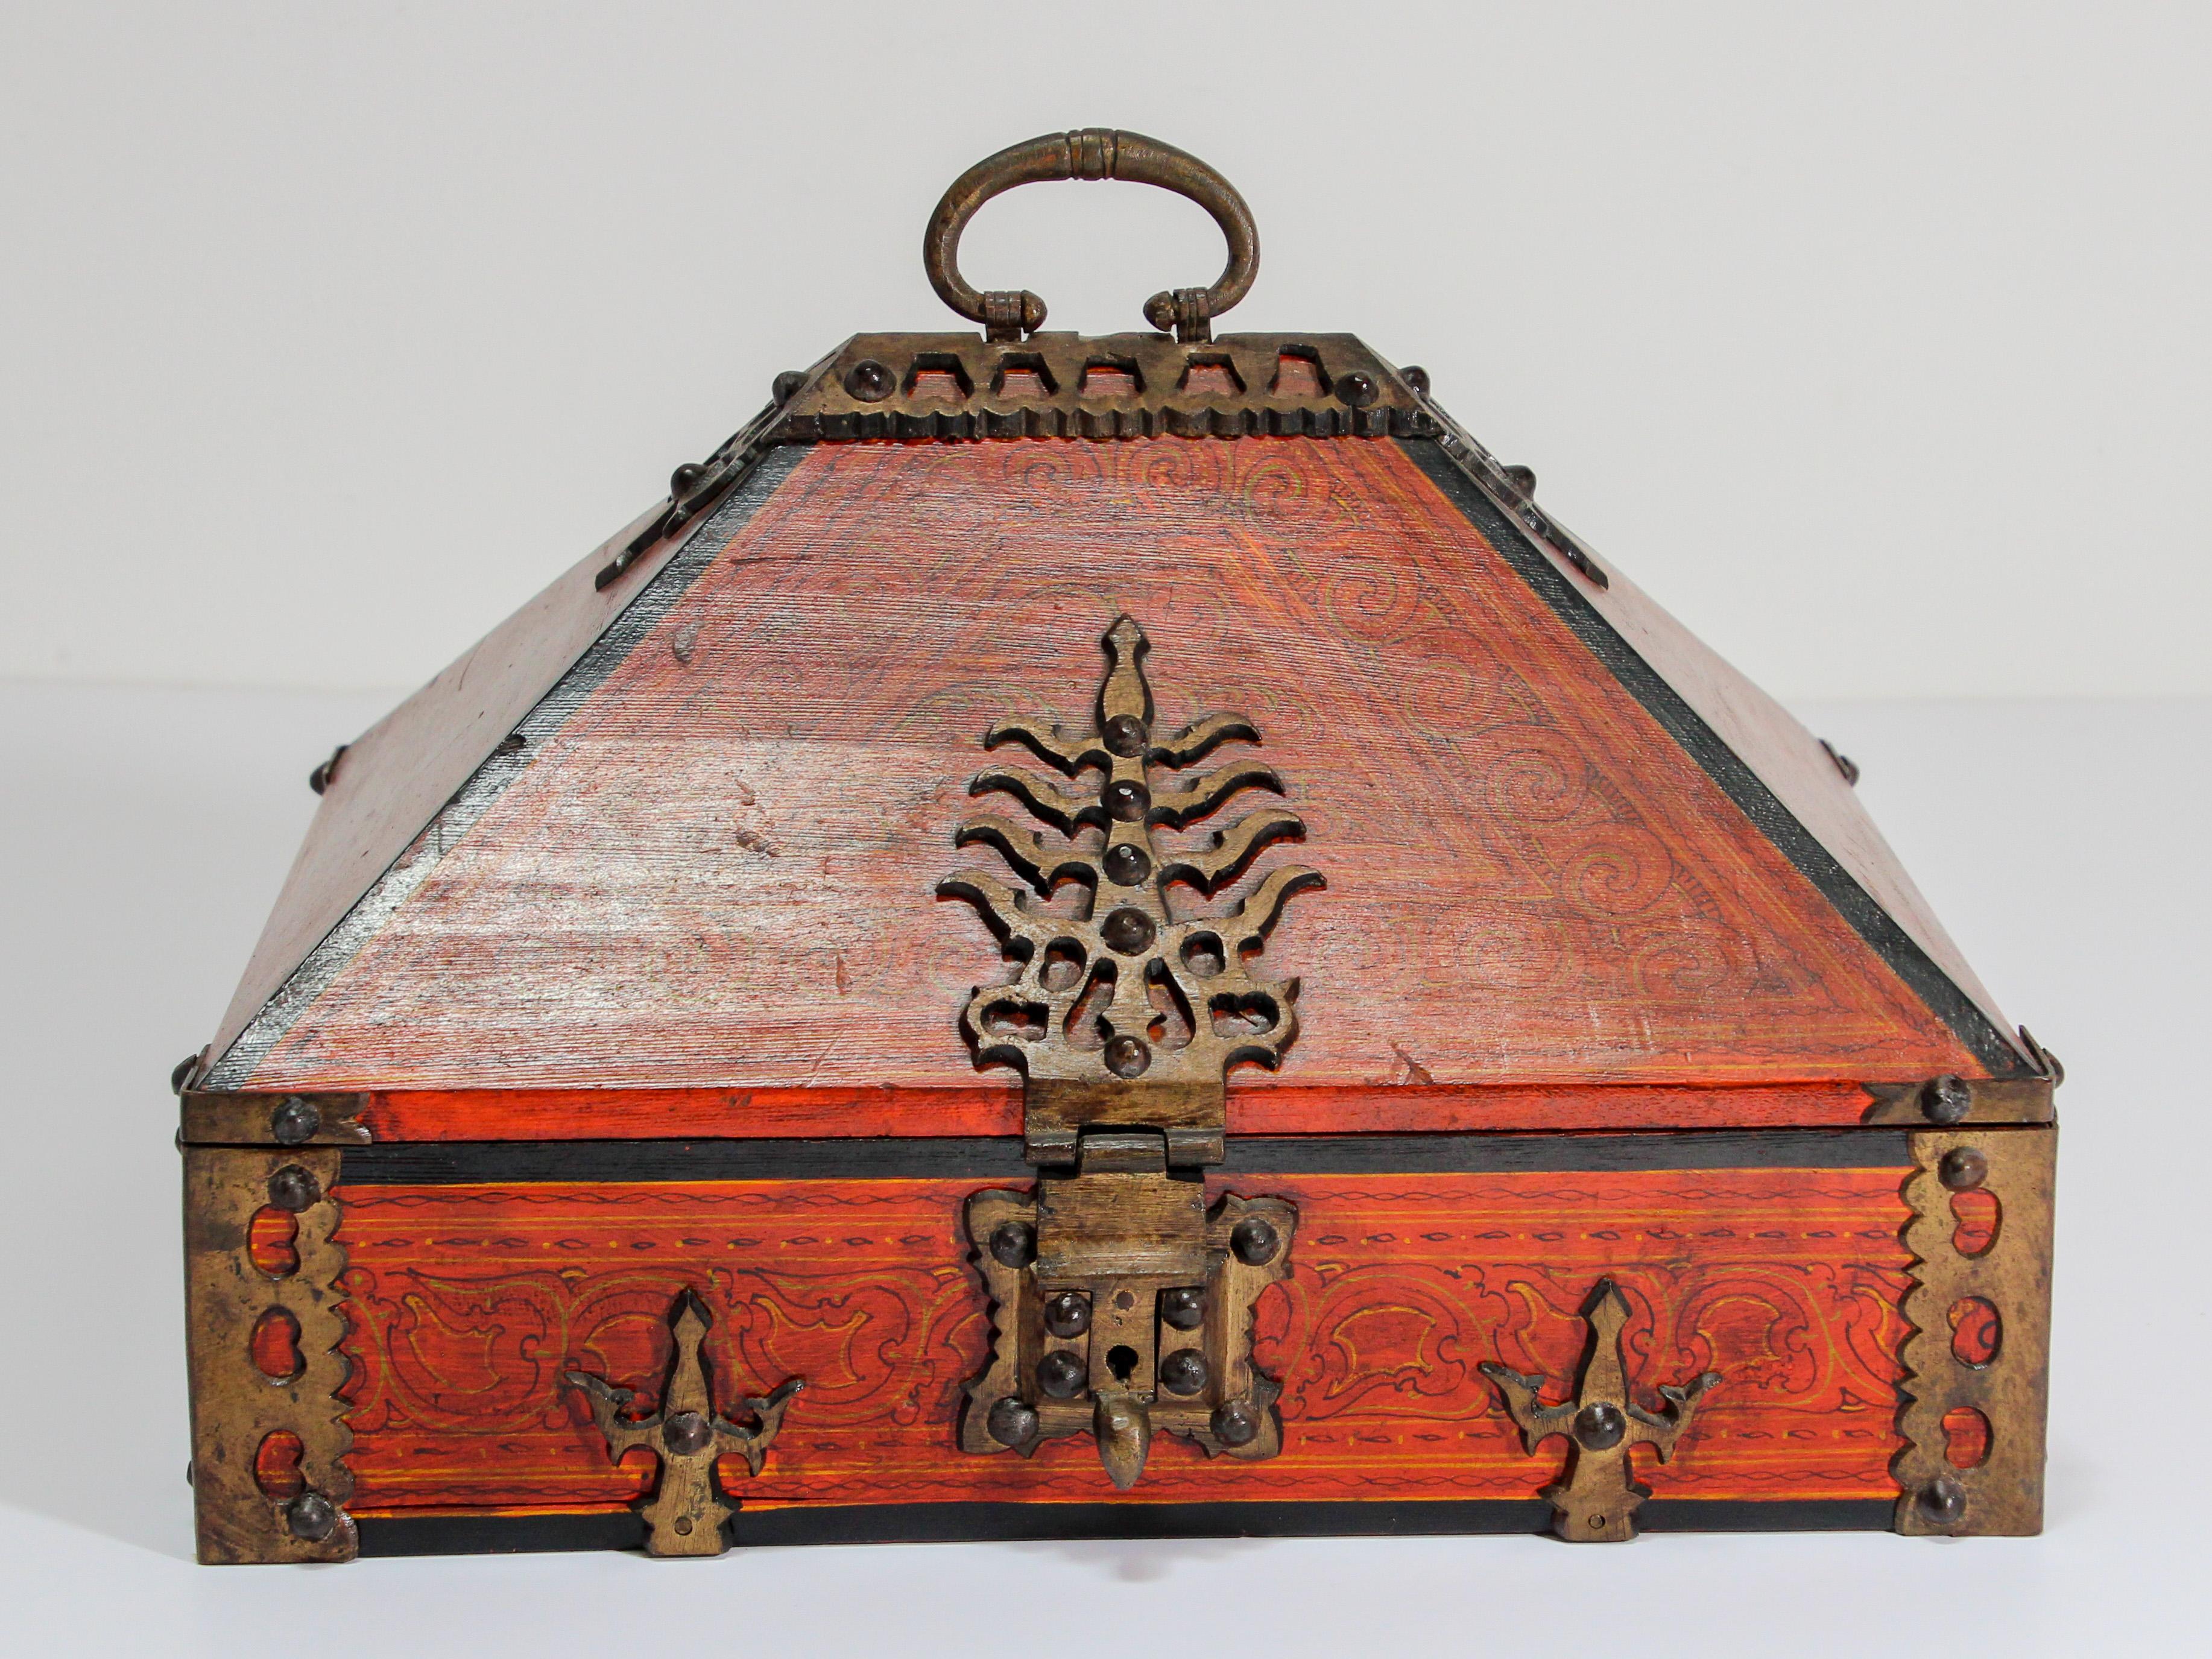 Large Teak Jewelry Dowry Box with Brass, Late 19th Century, India.
Indian Dowry Box in Lacquered Teak with Decorative Brass. This large Ethnic Indian jewelry box is hand-painted in red with a brass design, showcasing the original beauty of the